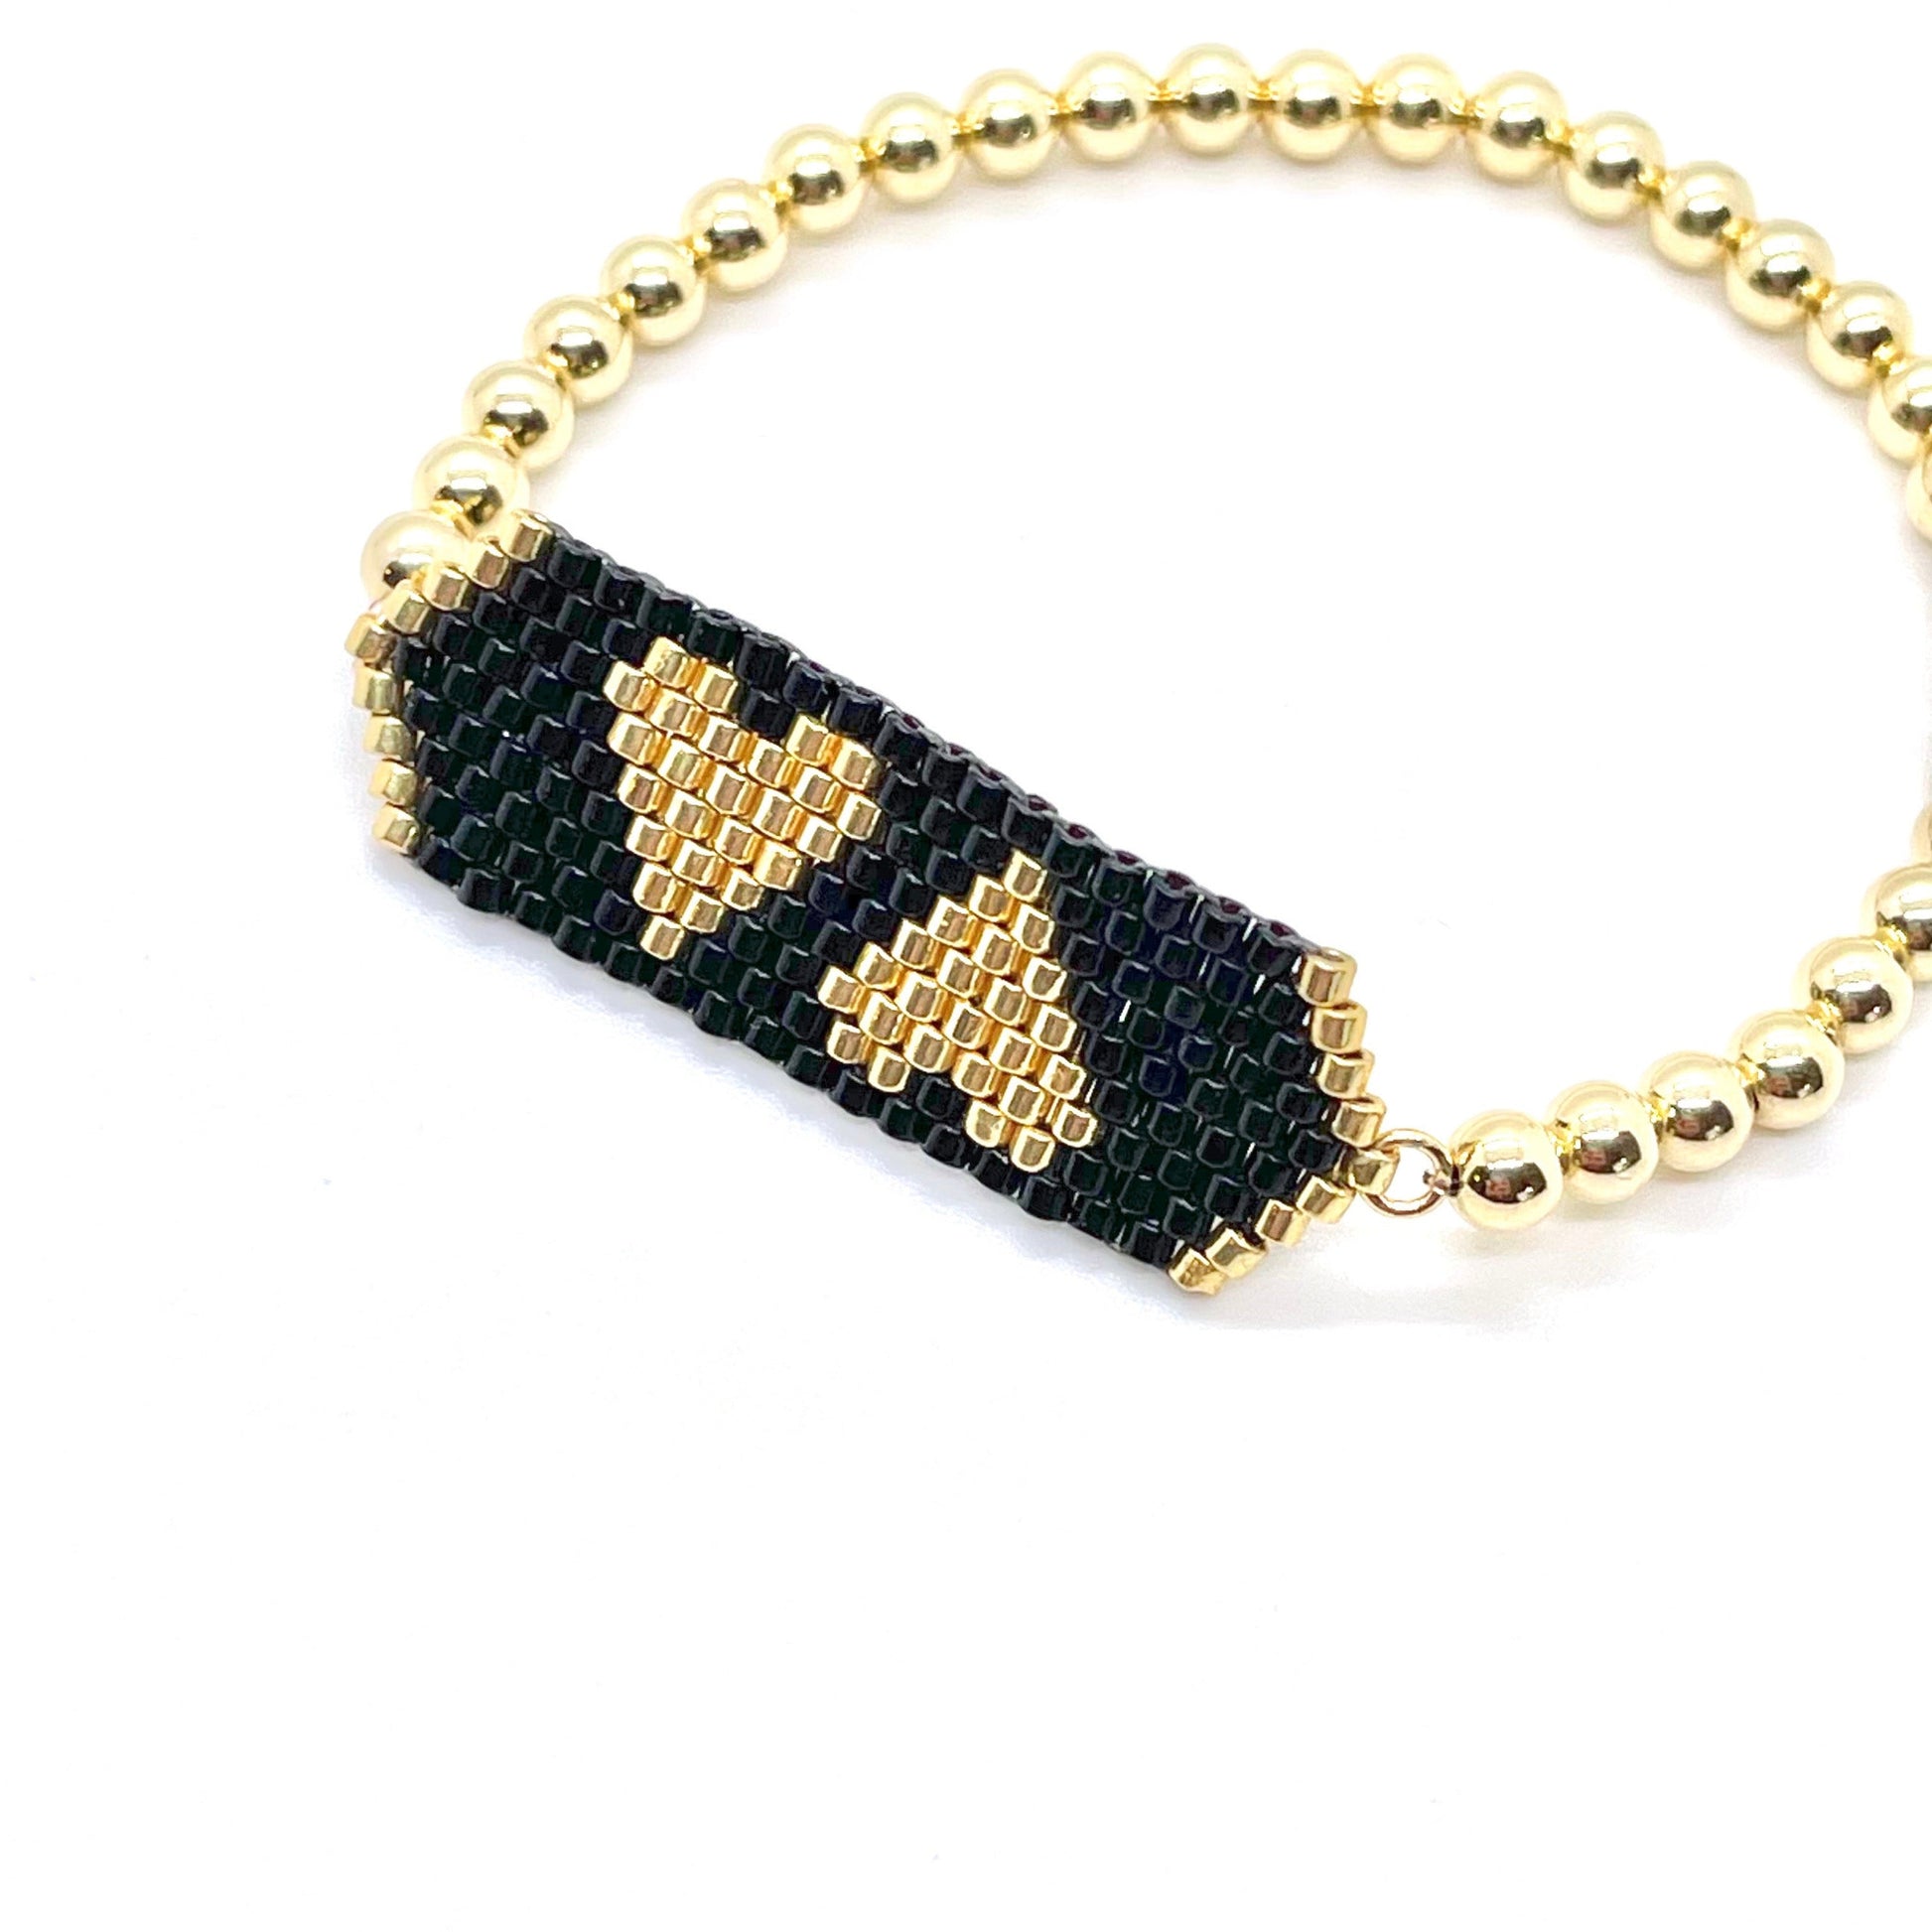 Heart beaded bracelet with black and gold seed beads on a 14K gold filled 4mm ball bracelet.